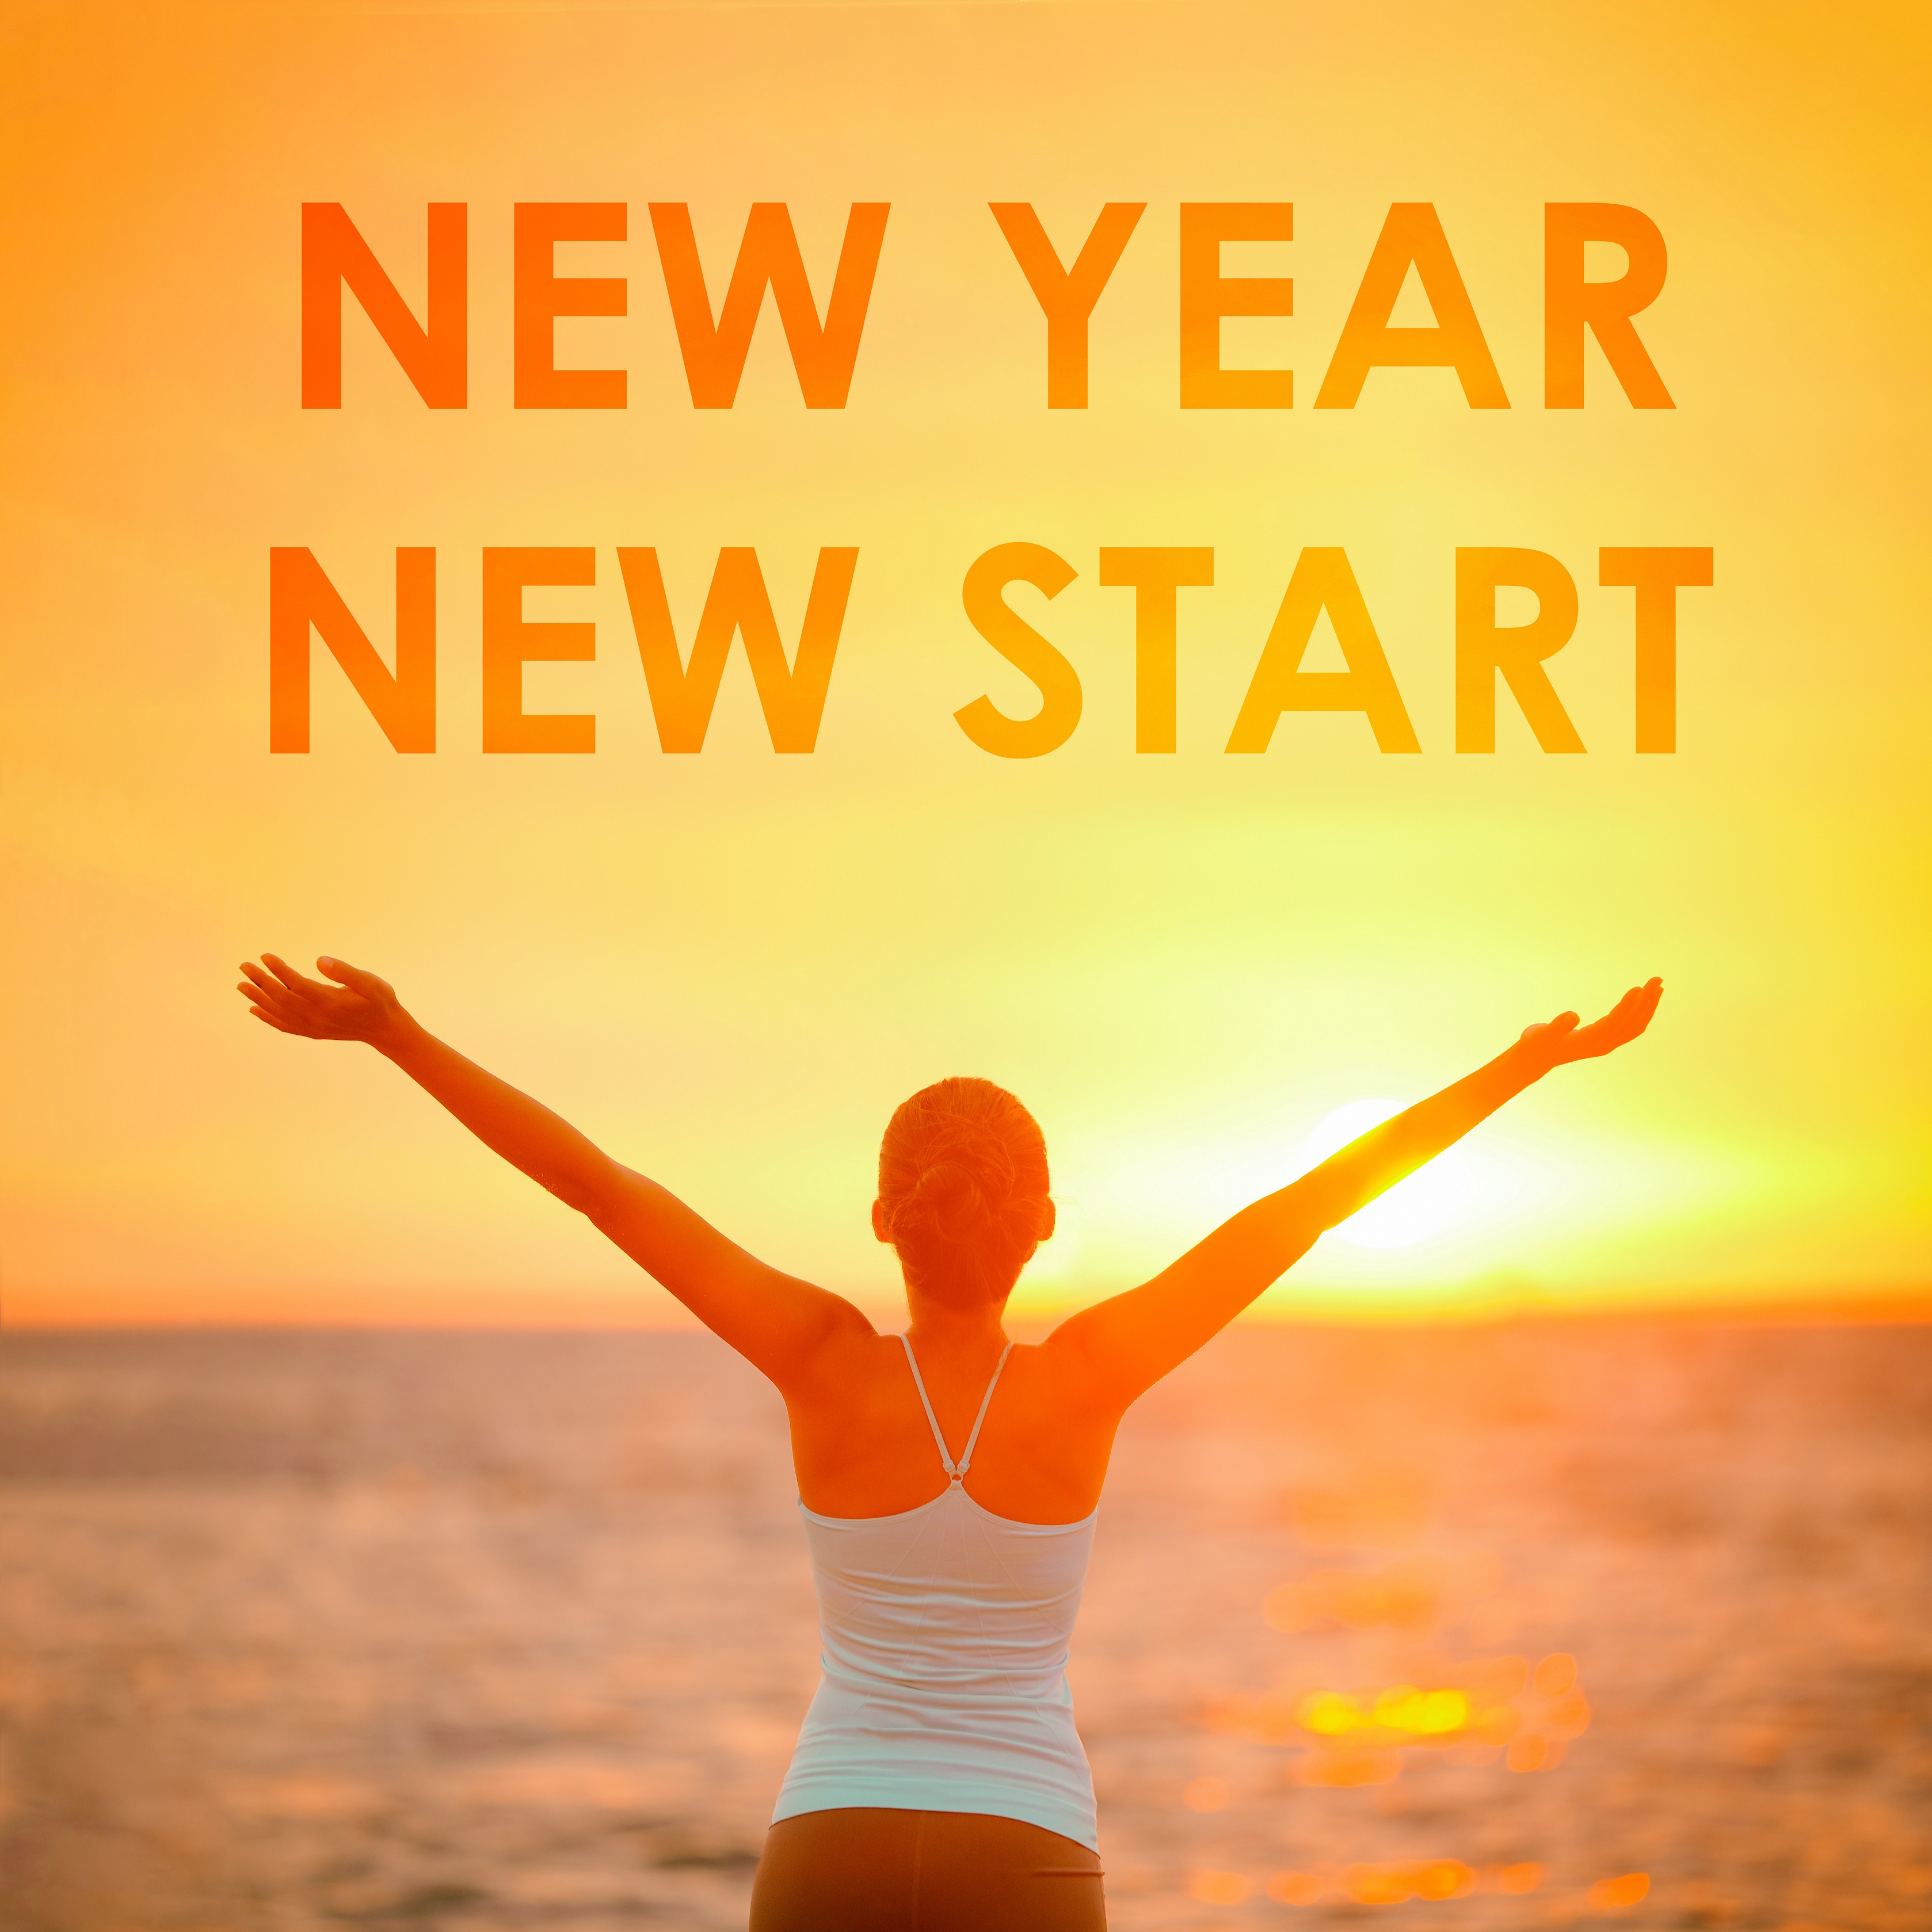 2019: A New Year, A New You!